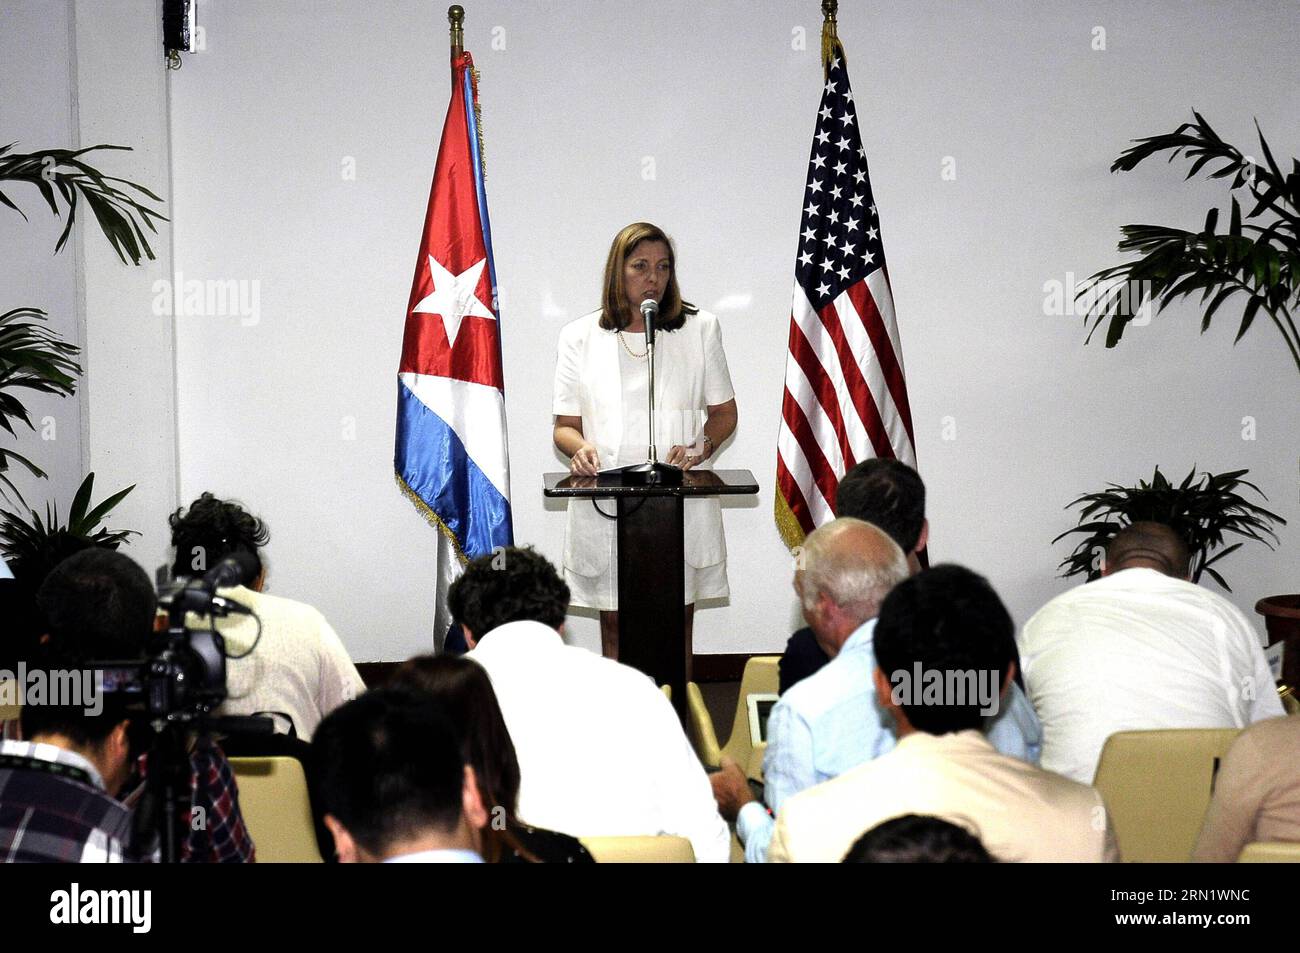 (150122) -- HAVANA, Jan. 22, 2015 -- Josefina Vidal Ferreira, Director General for United States of Cuban Miniy of Foreign Affairs, speaks in a press conference on the issue of restoring diplomatic relations of Cuba-U.S. at Conventions Palace of Havana in Havana, Cuba, Jan. 22, 2015. Delegations from Cuba and the U.S. held historic high-level talks on the issues of restoring relations and immigration during the 2-day meeting here. ) (jg) CUBA-HAVANA-US-DIPLOMATIC RELATIONS-RESTORING-PRESS Str PUBLICATIONxNOTxINxCHN   Havana Jan 22 2015 Josefina Vidal Ferreira Director General for United States Stock Photo